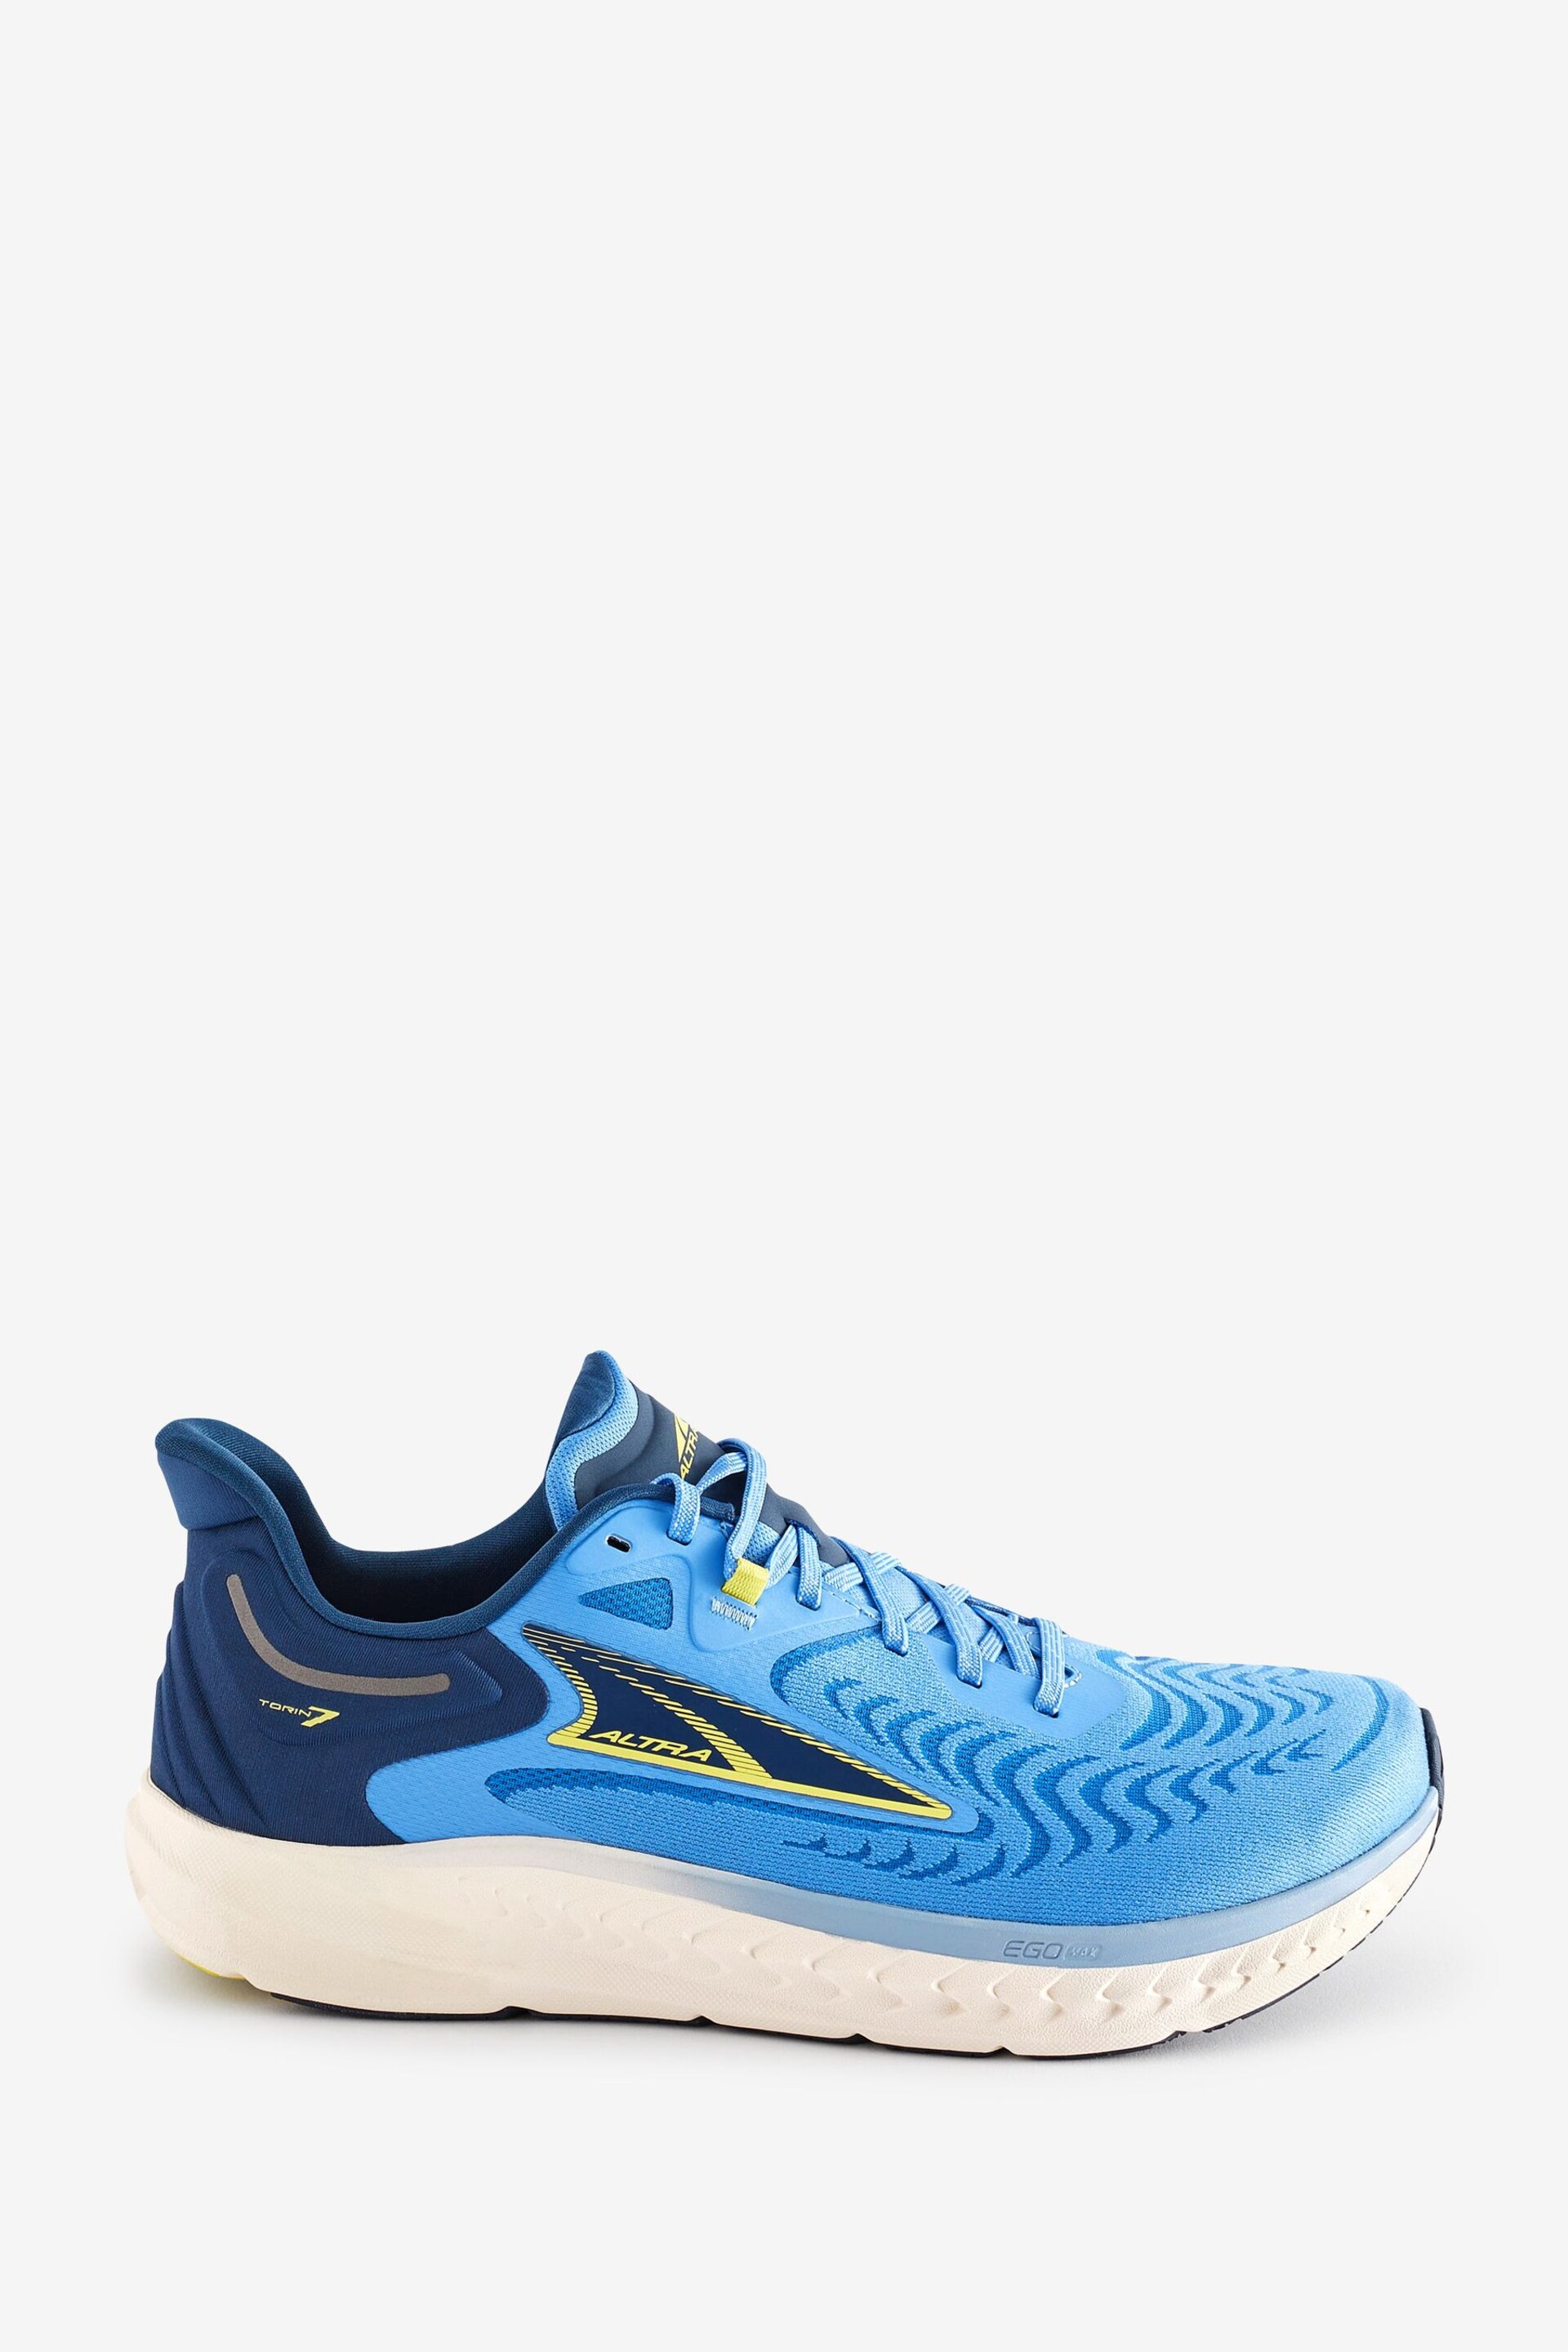 Altra Mens Torin 7 Trainers - Image 1 of 5